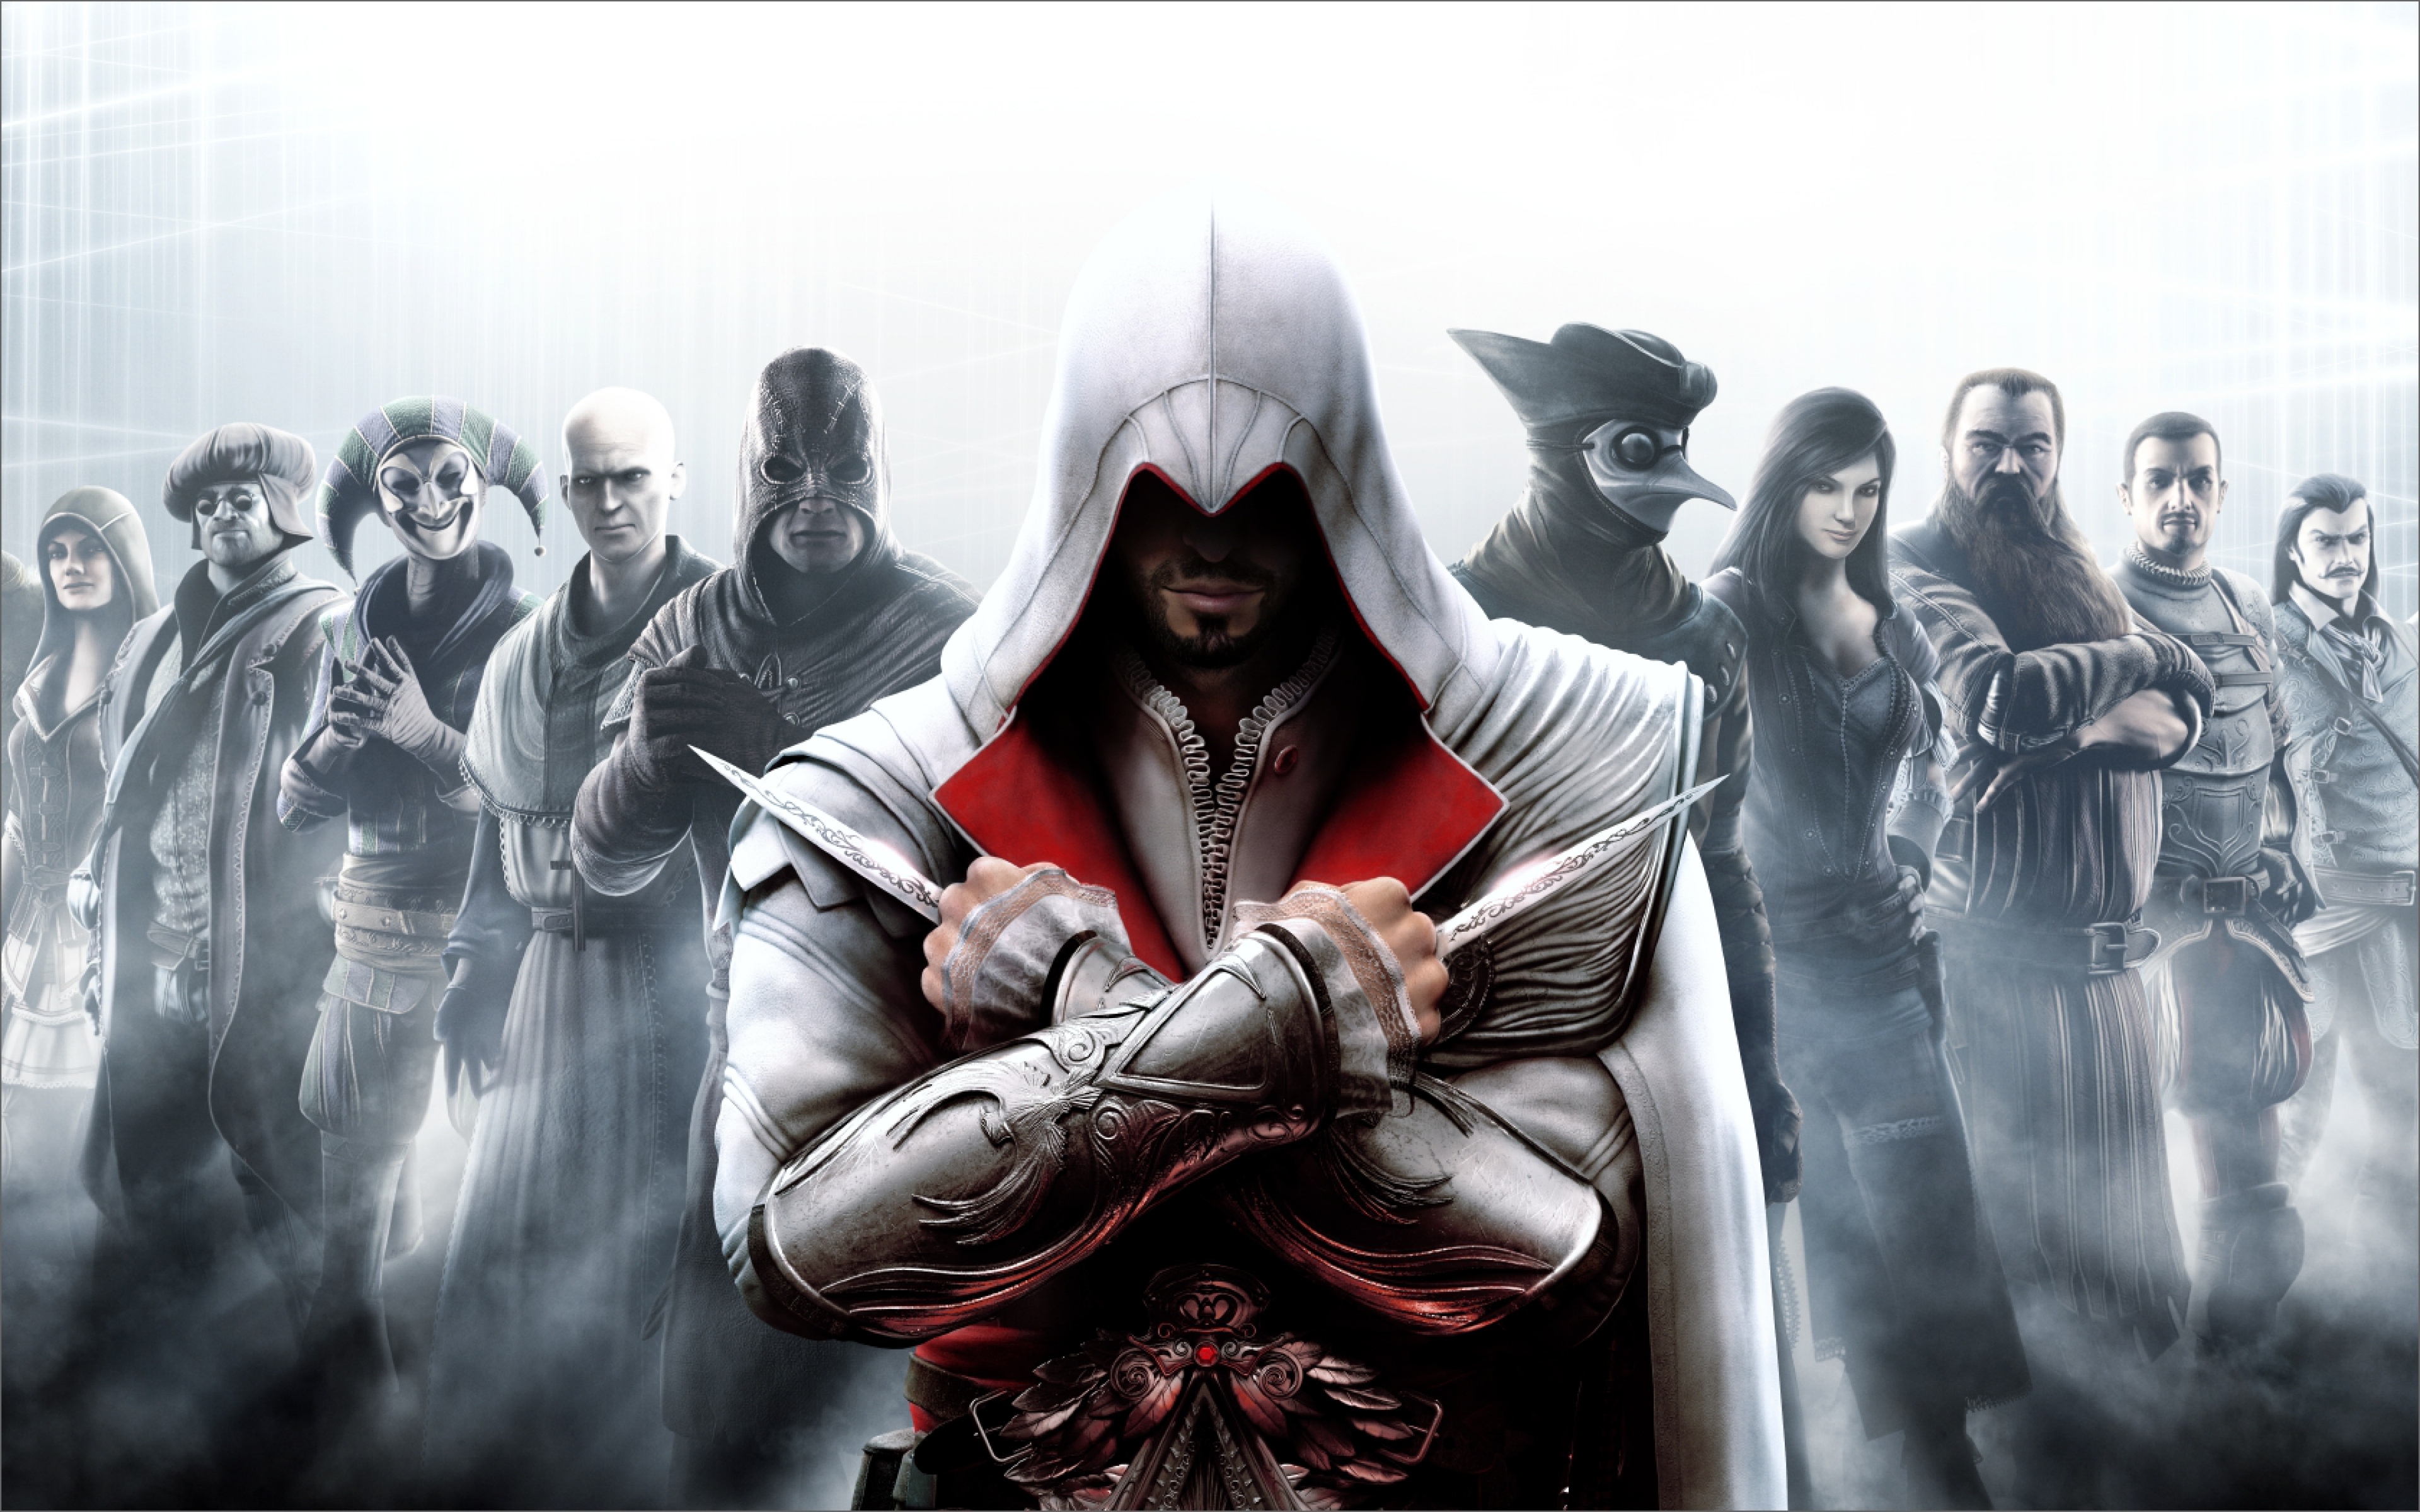 Assassin creed wallpapers download free